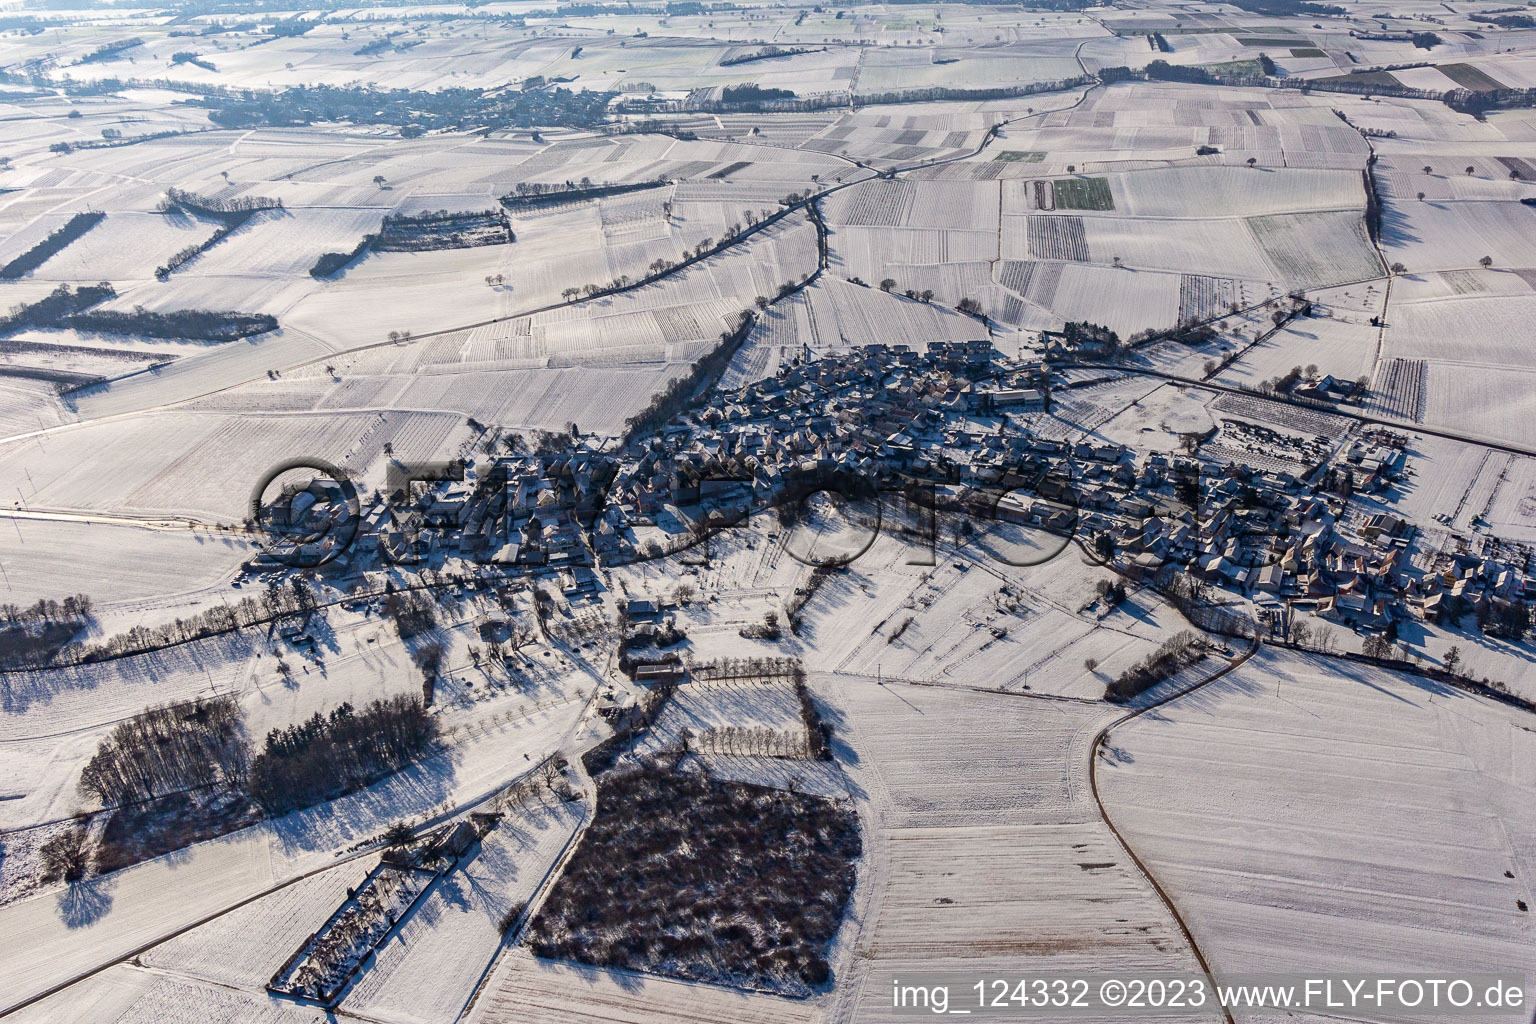 Wintry snowy village - view on the edge of agricultural fields and farmland in Oberhausen in the state Rhineland-Palatinate, Germany